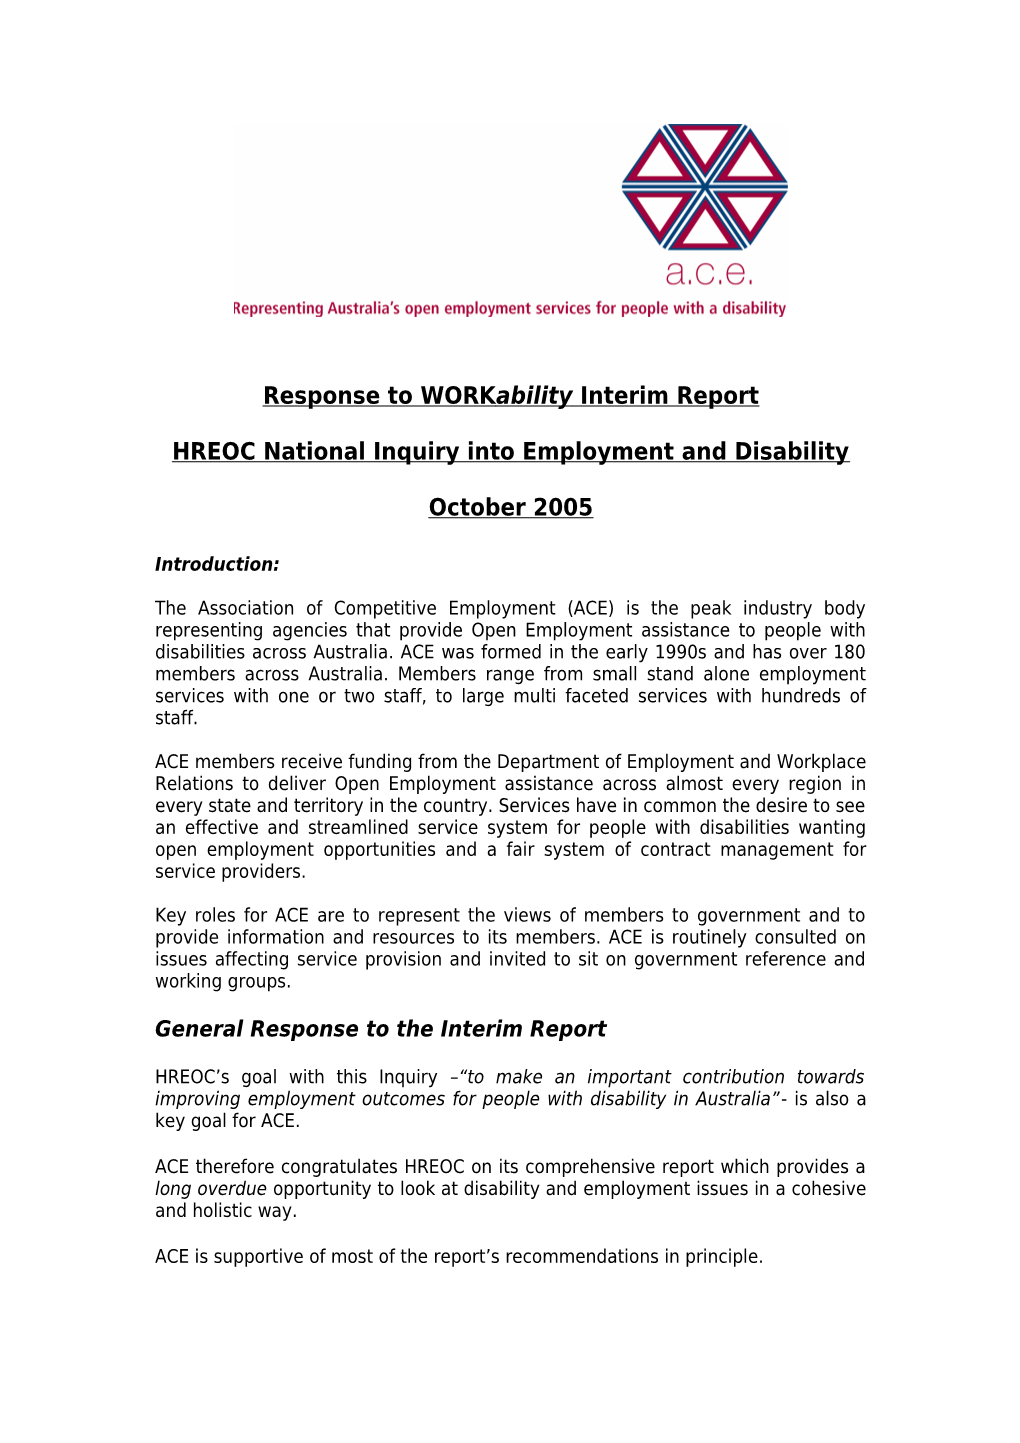 HREOC National Inquiry Into Employment and Disability